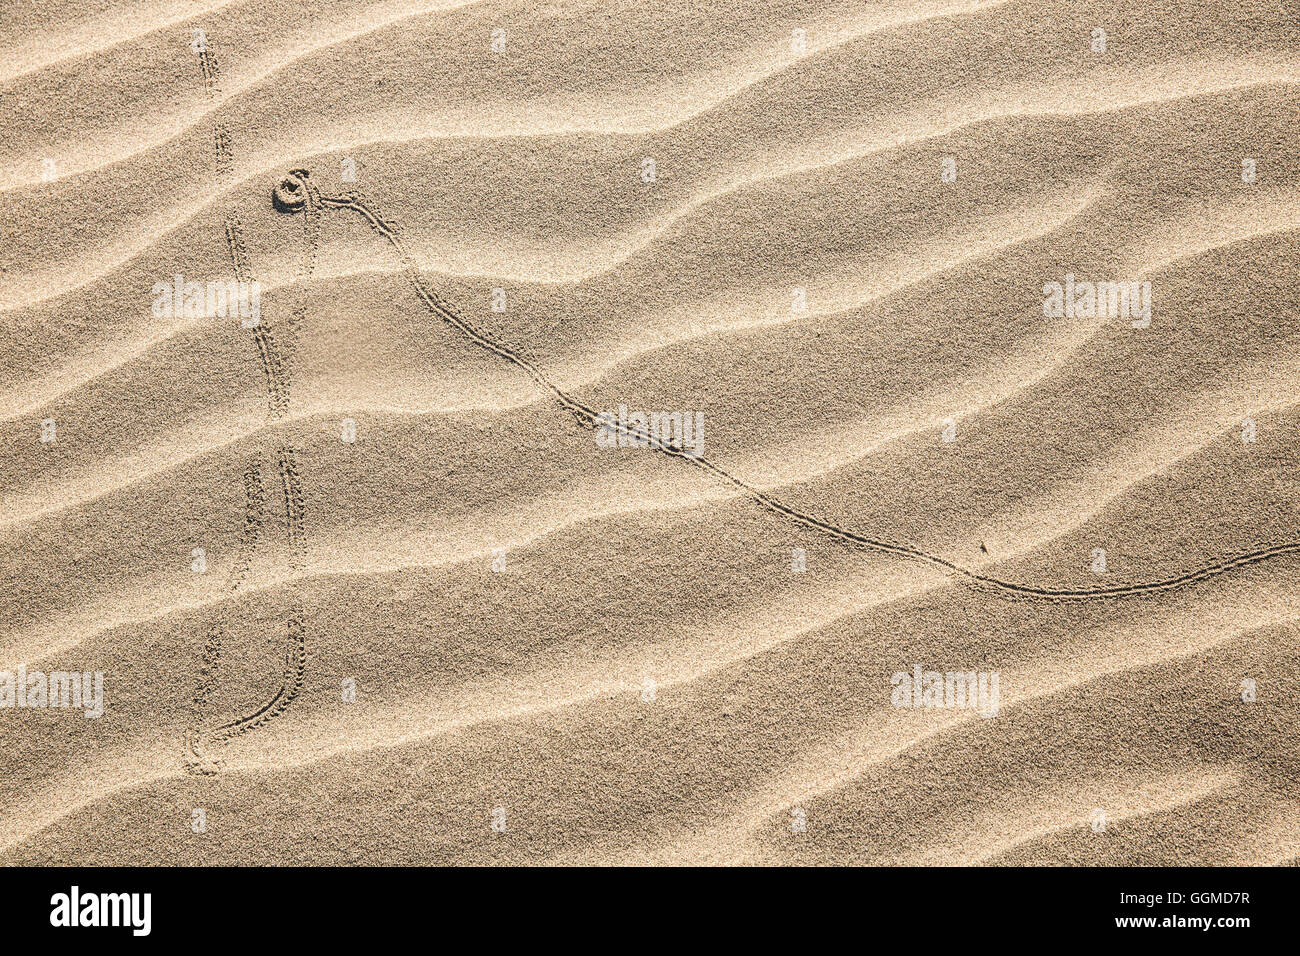 Track of a beetle or a lizard, Wharariki Beach at Farewell Spit, South Island, New Zealand Stock Photo